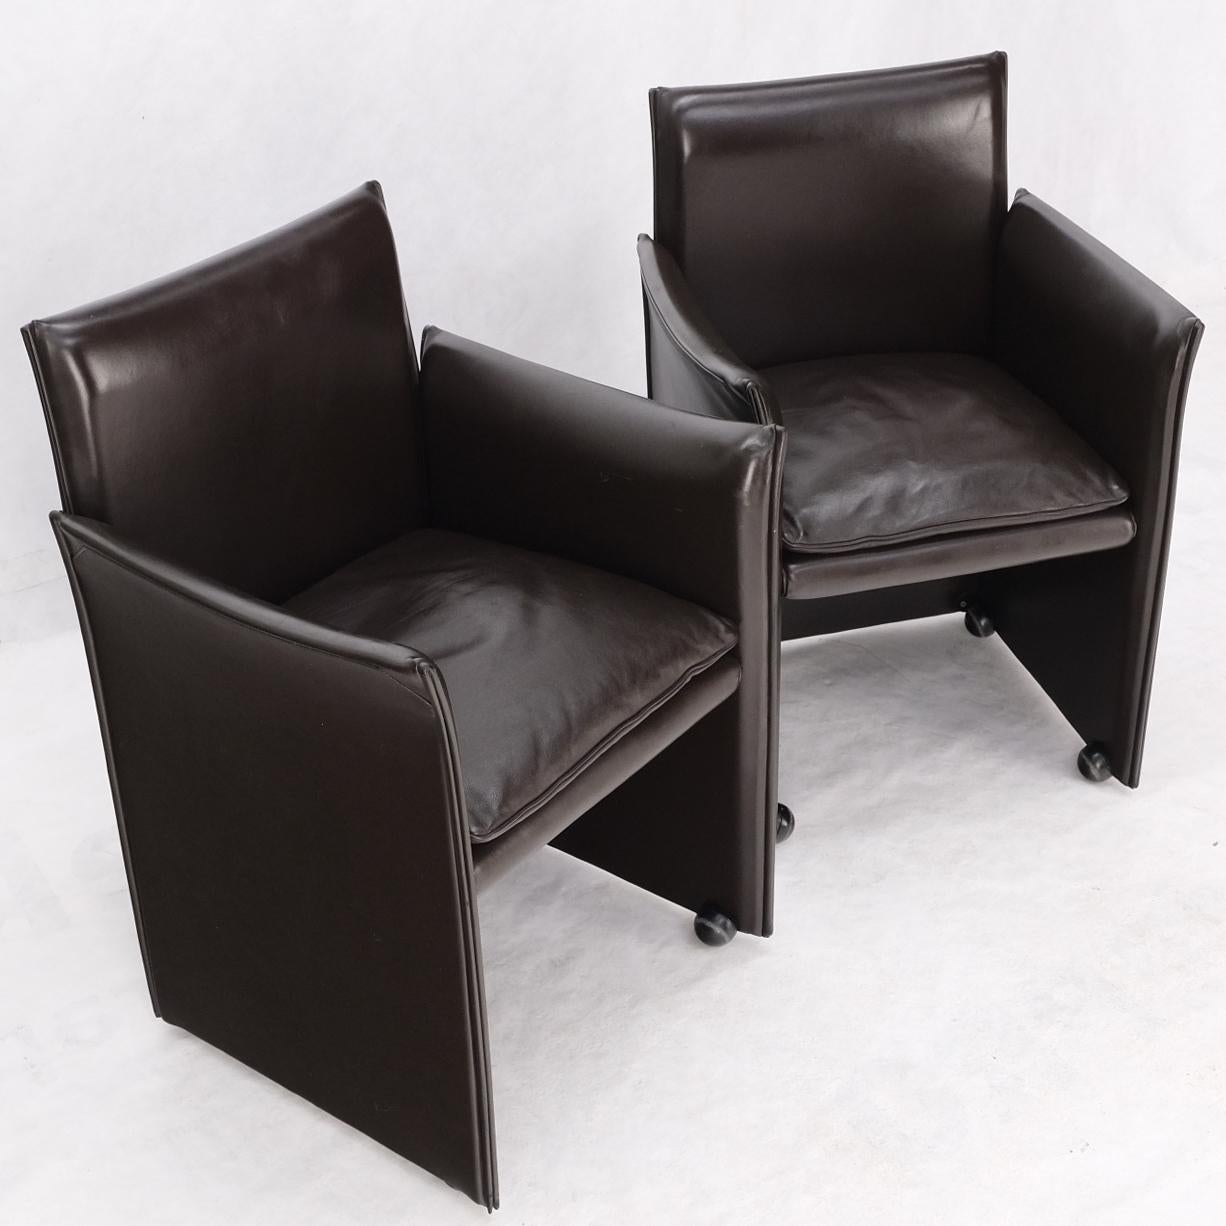 Pair of dark brown plum leather break side chairs Mario Bellini for Cassina Mint.